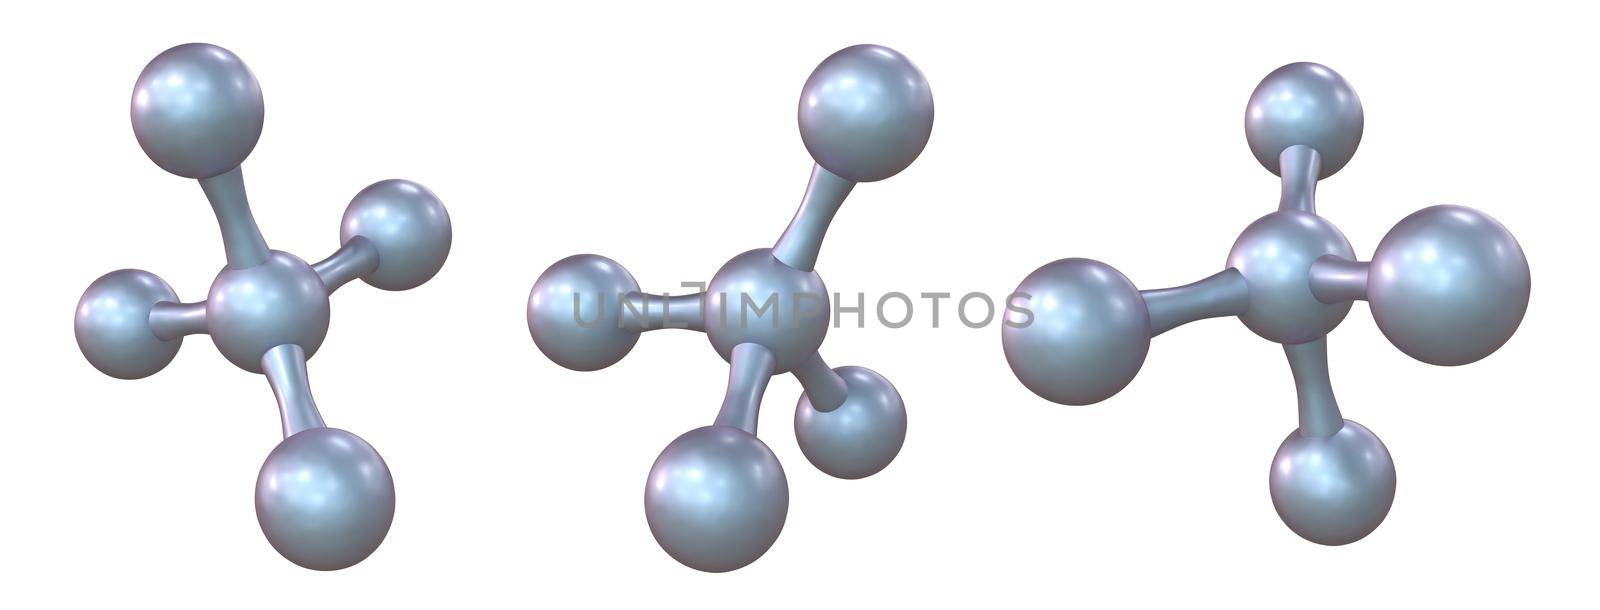 Three abstract molecules 3D rendering illustration isolated on white background